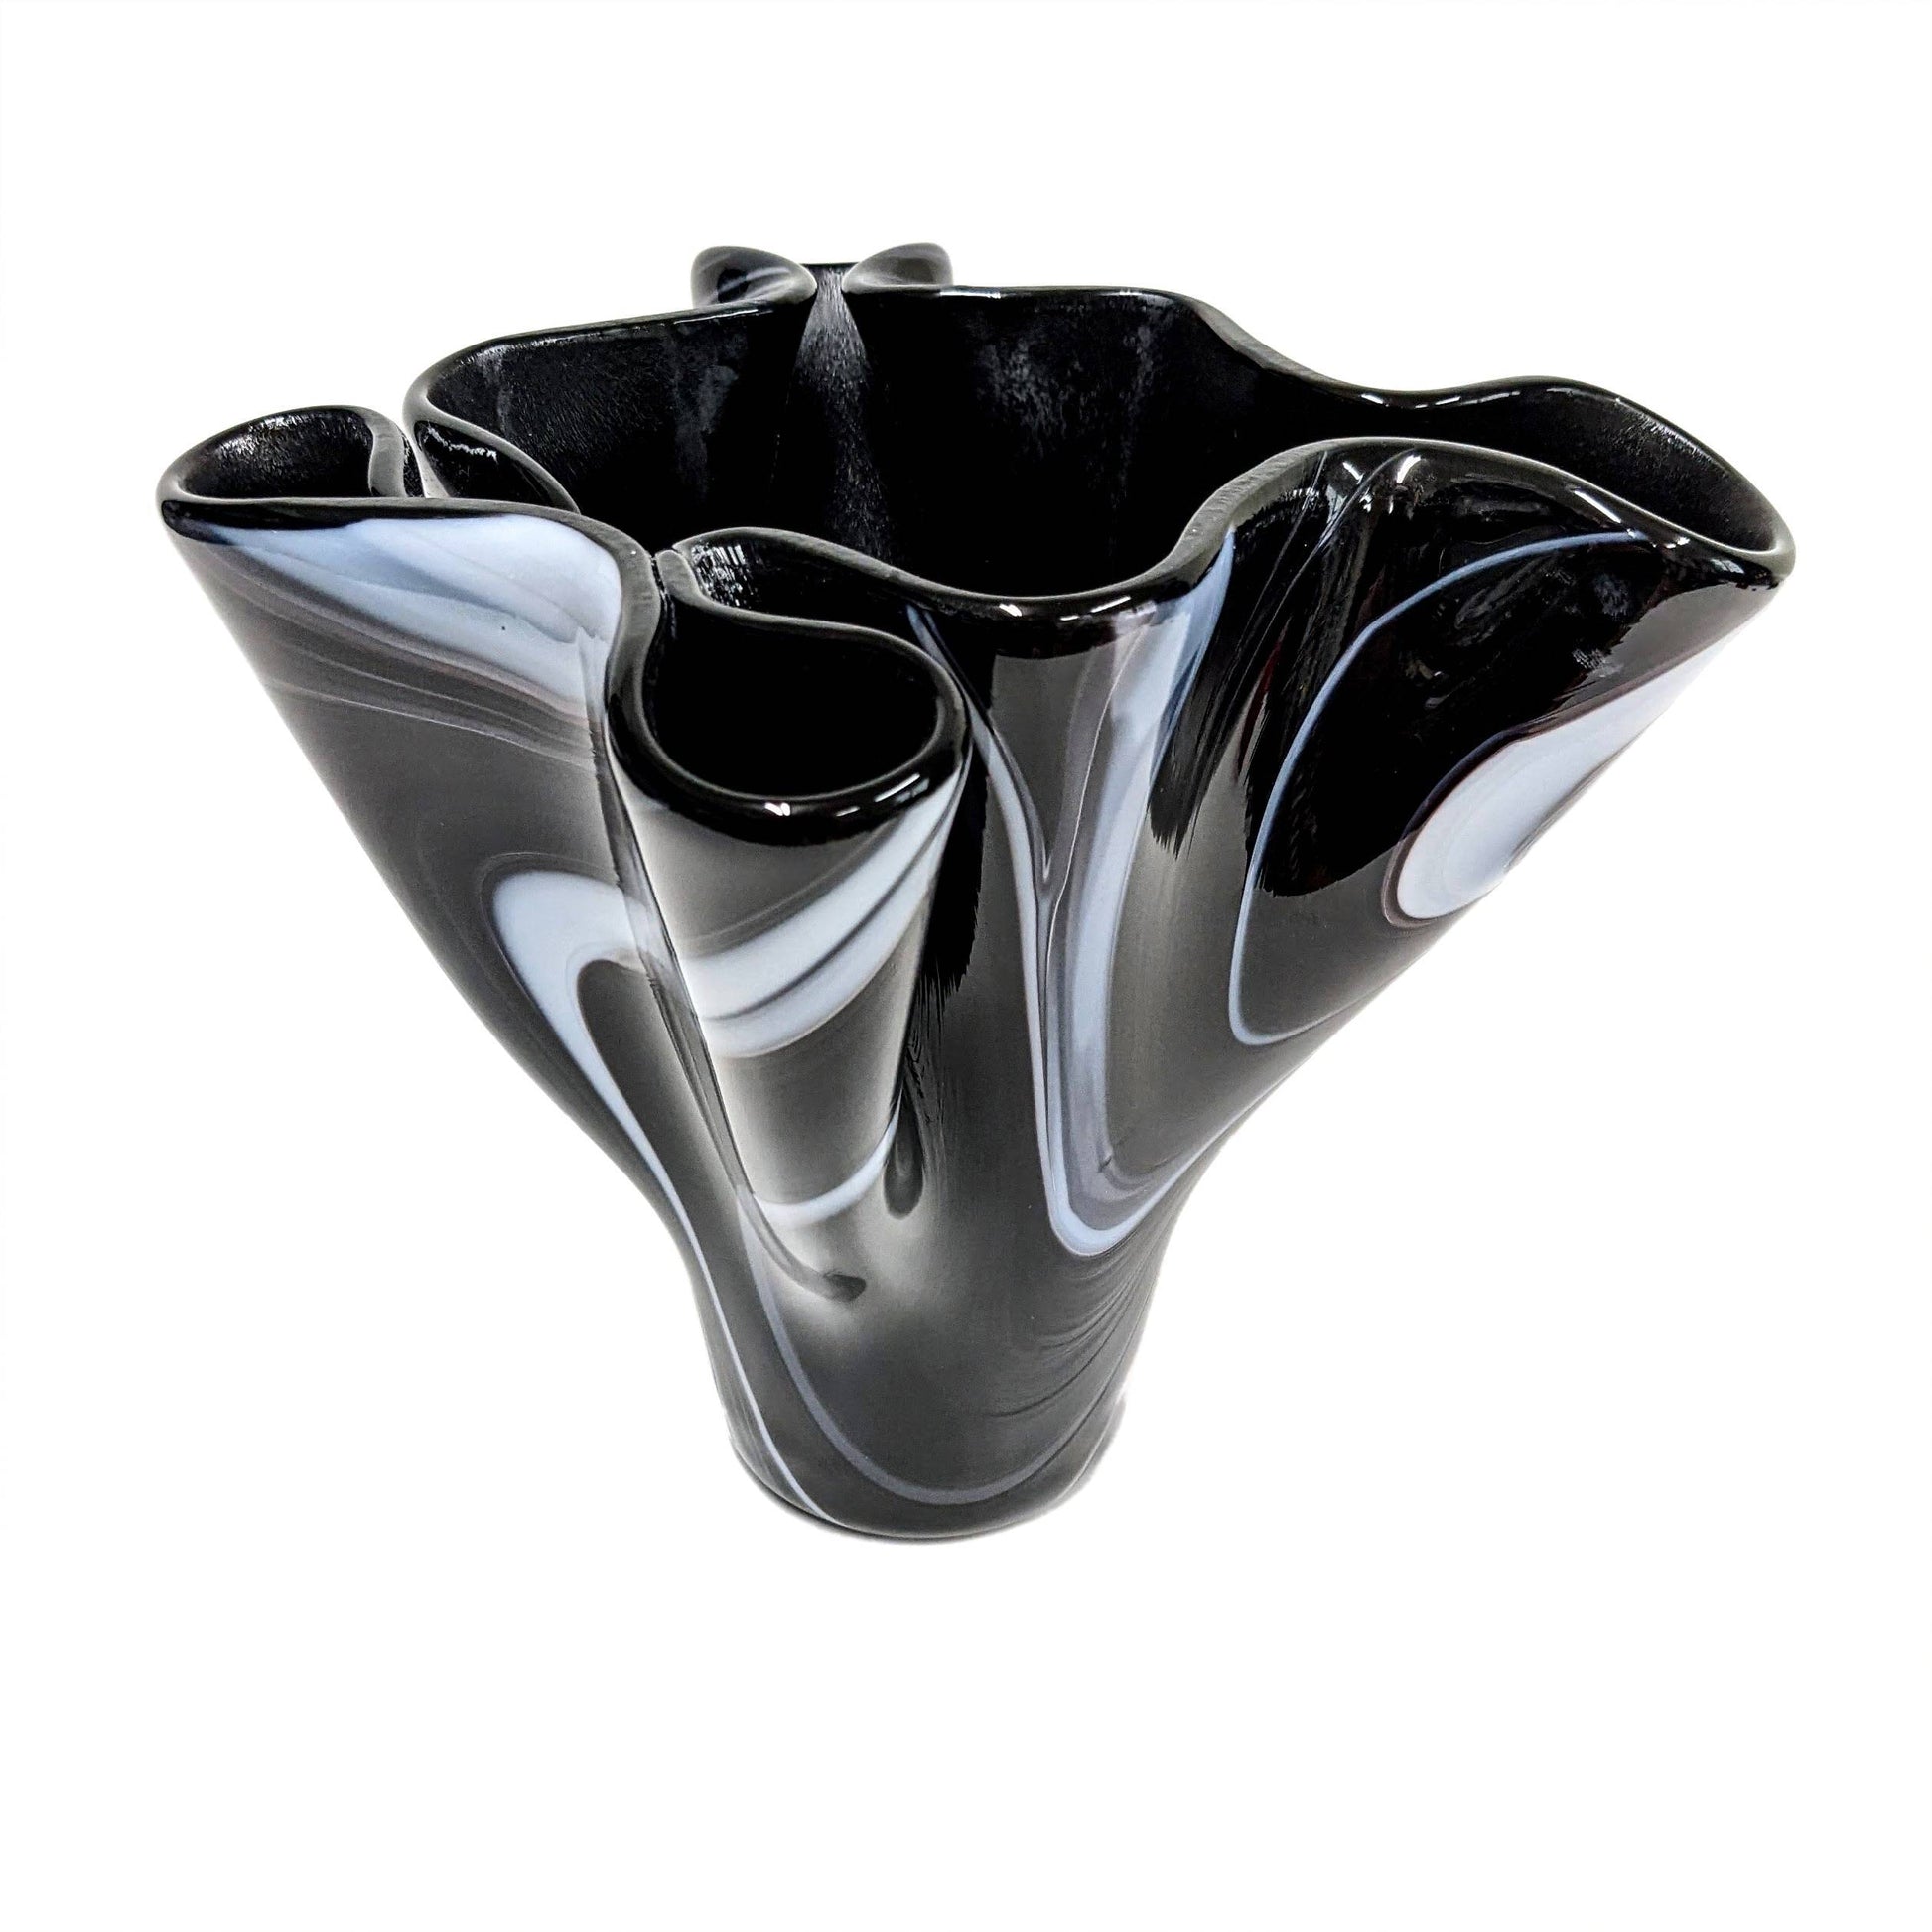 Glass Art Vase in Black and White | Handcrafted Glass Art Décor Gifts